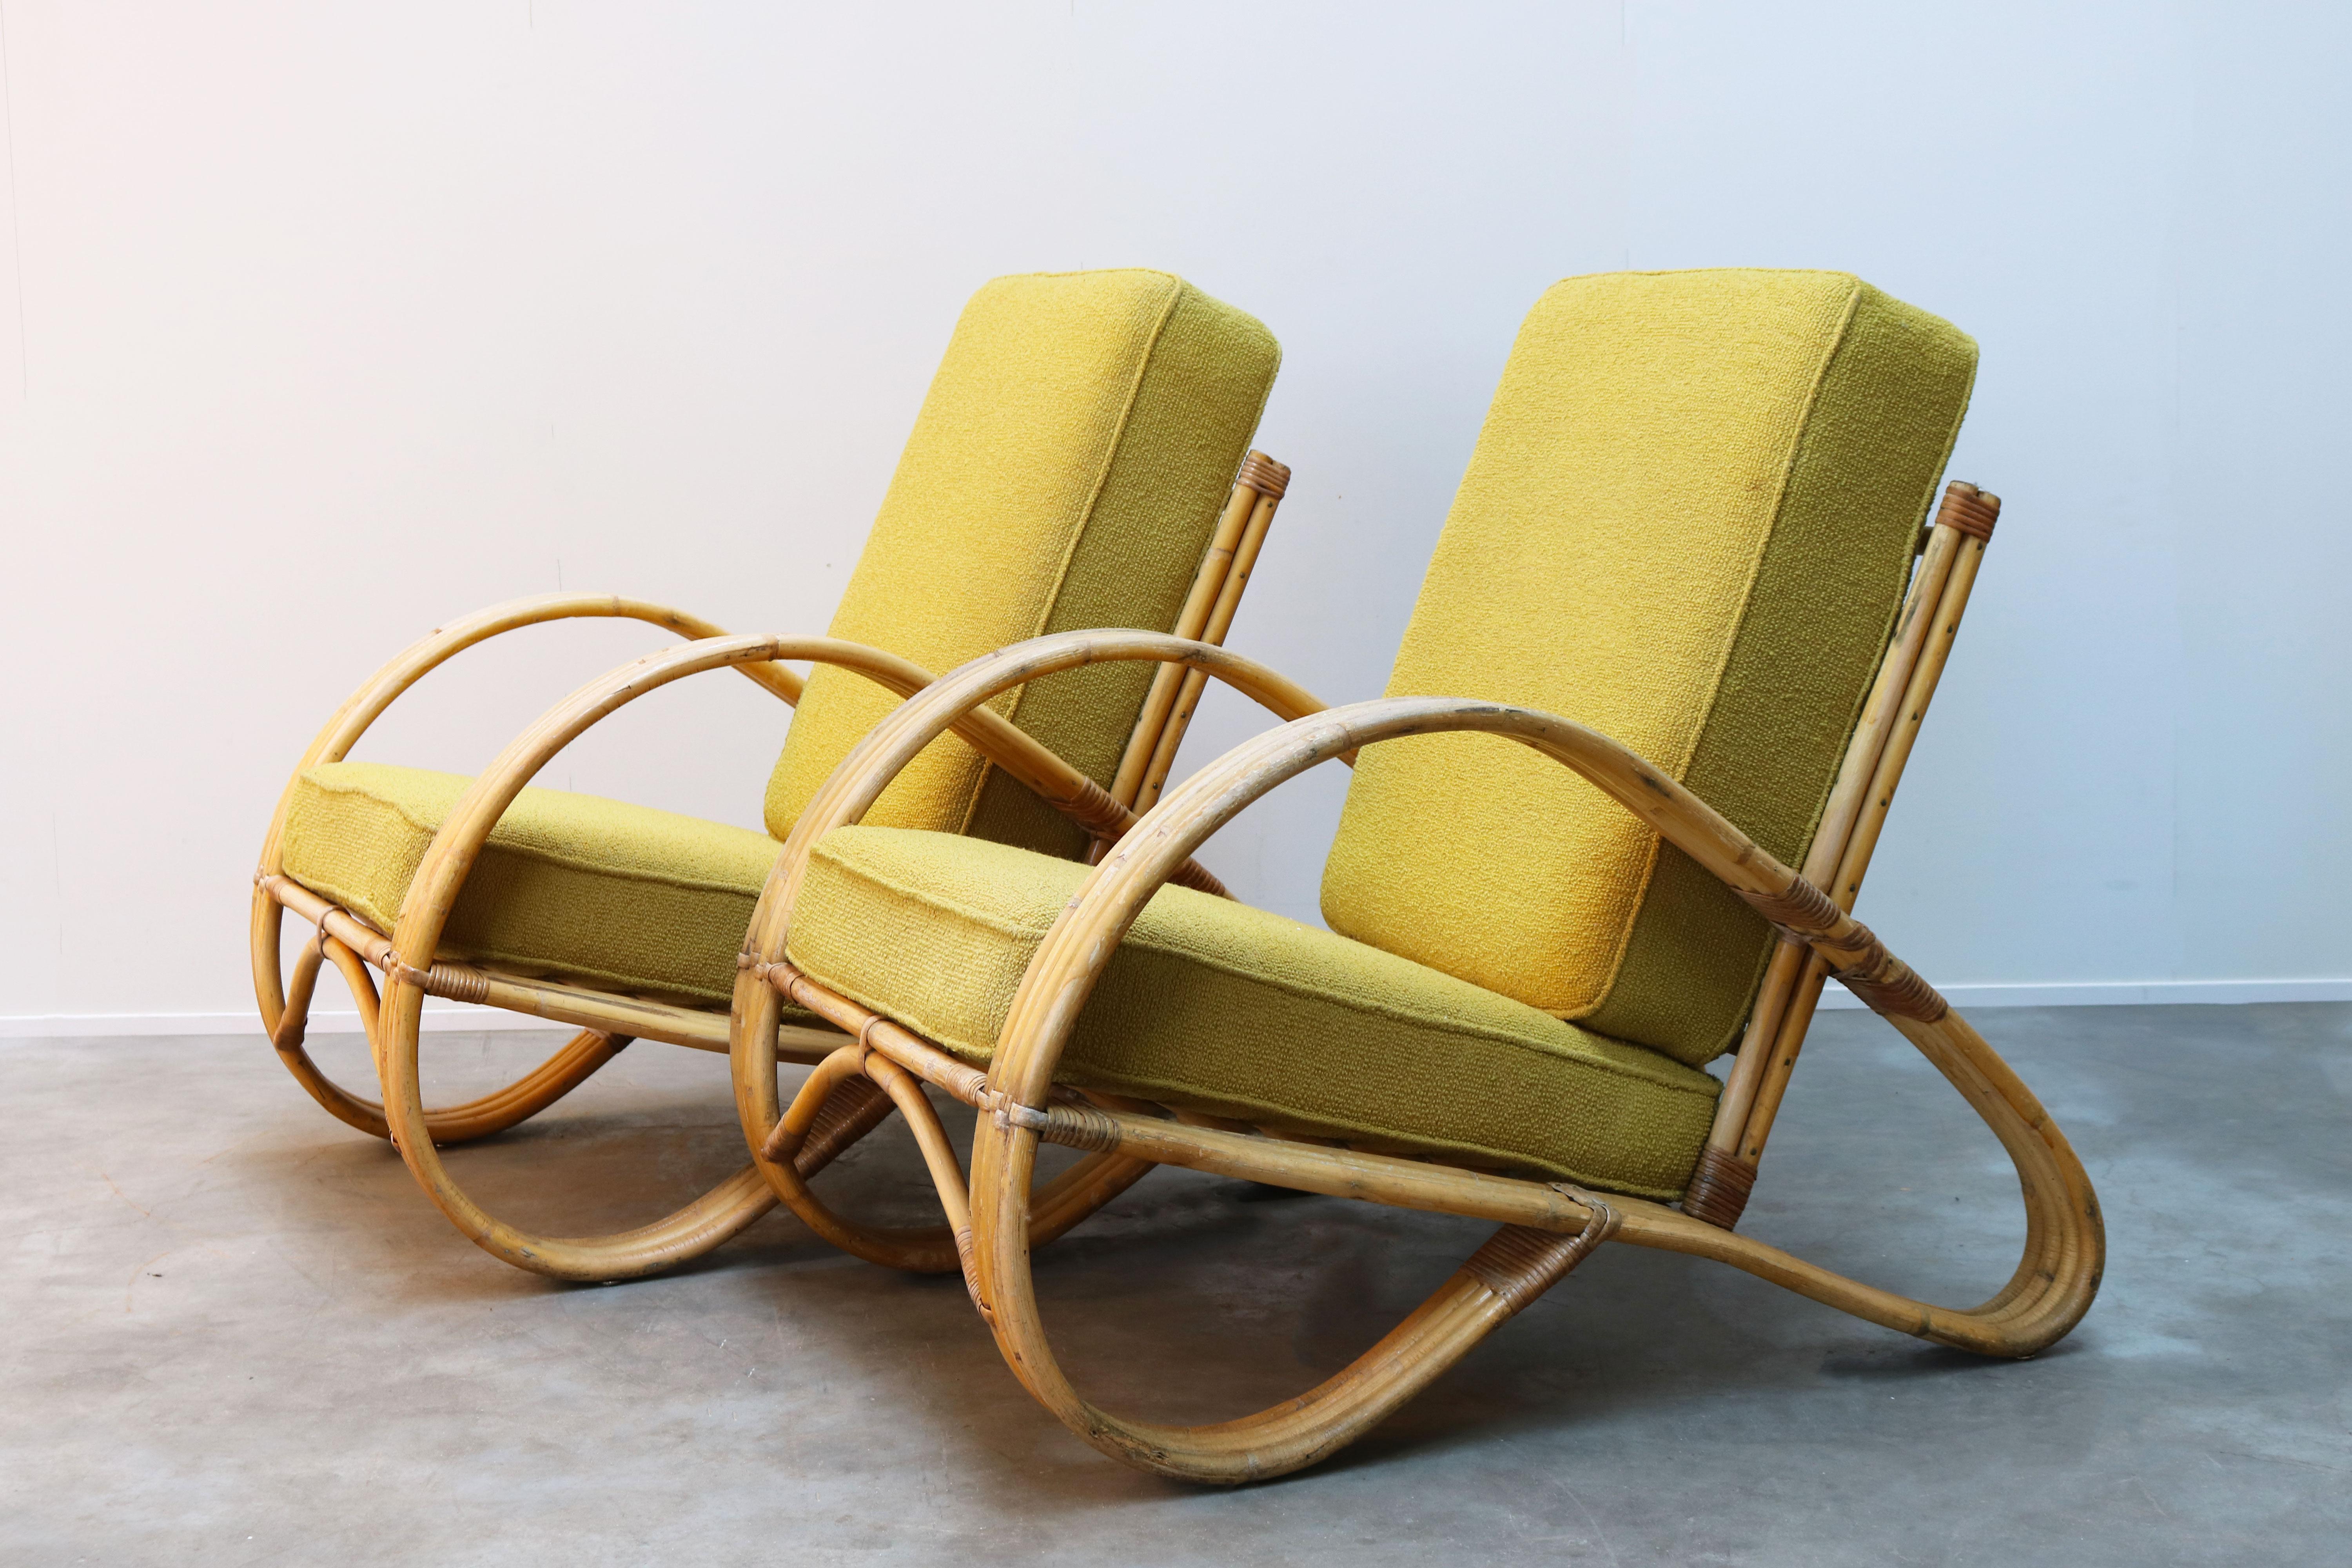 Rare pair of early 1950s rattan lounge chairs designed by Dutch designer Rohe Noordwolde in the early 1950s. De lounge chairs have a wonderful and appealing shape; they are fully made of rattan. Very firm and heavy quality, and very comfortable. The